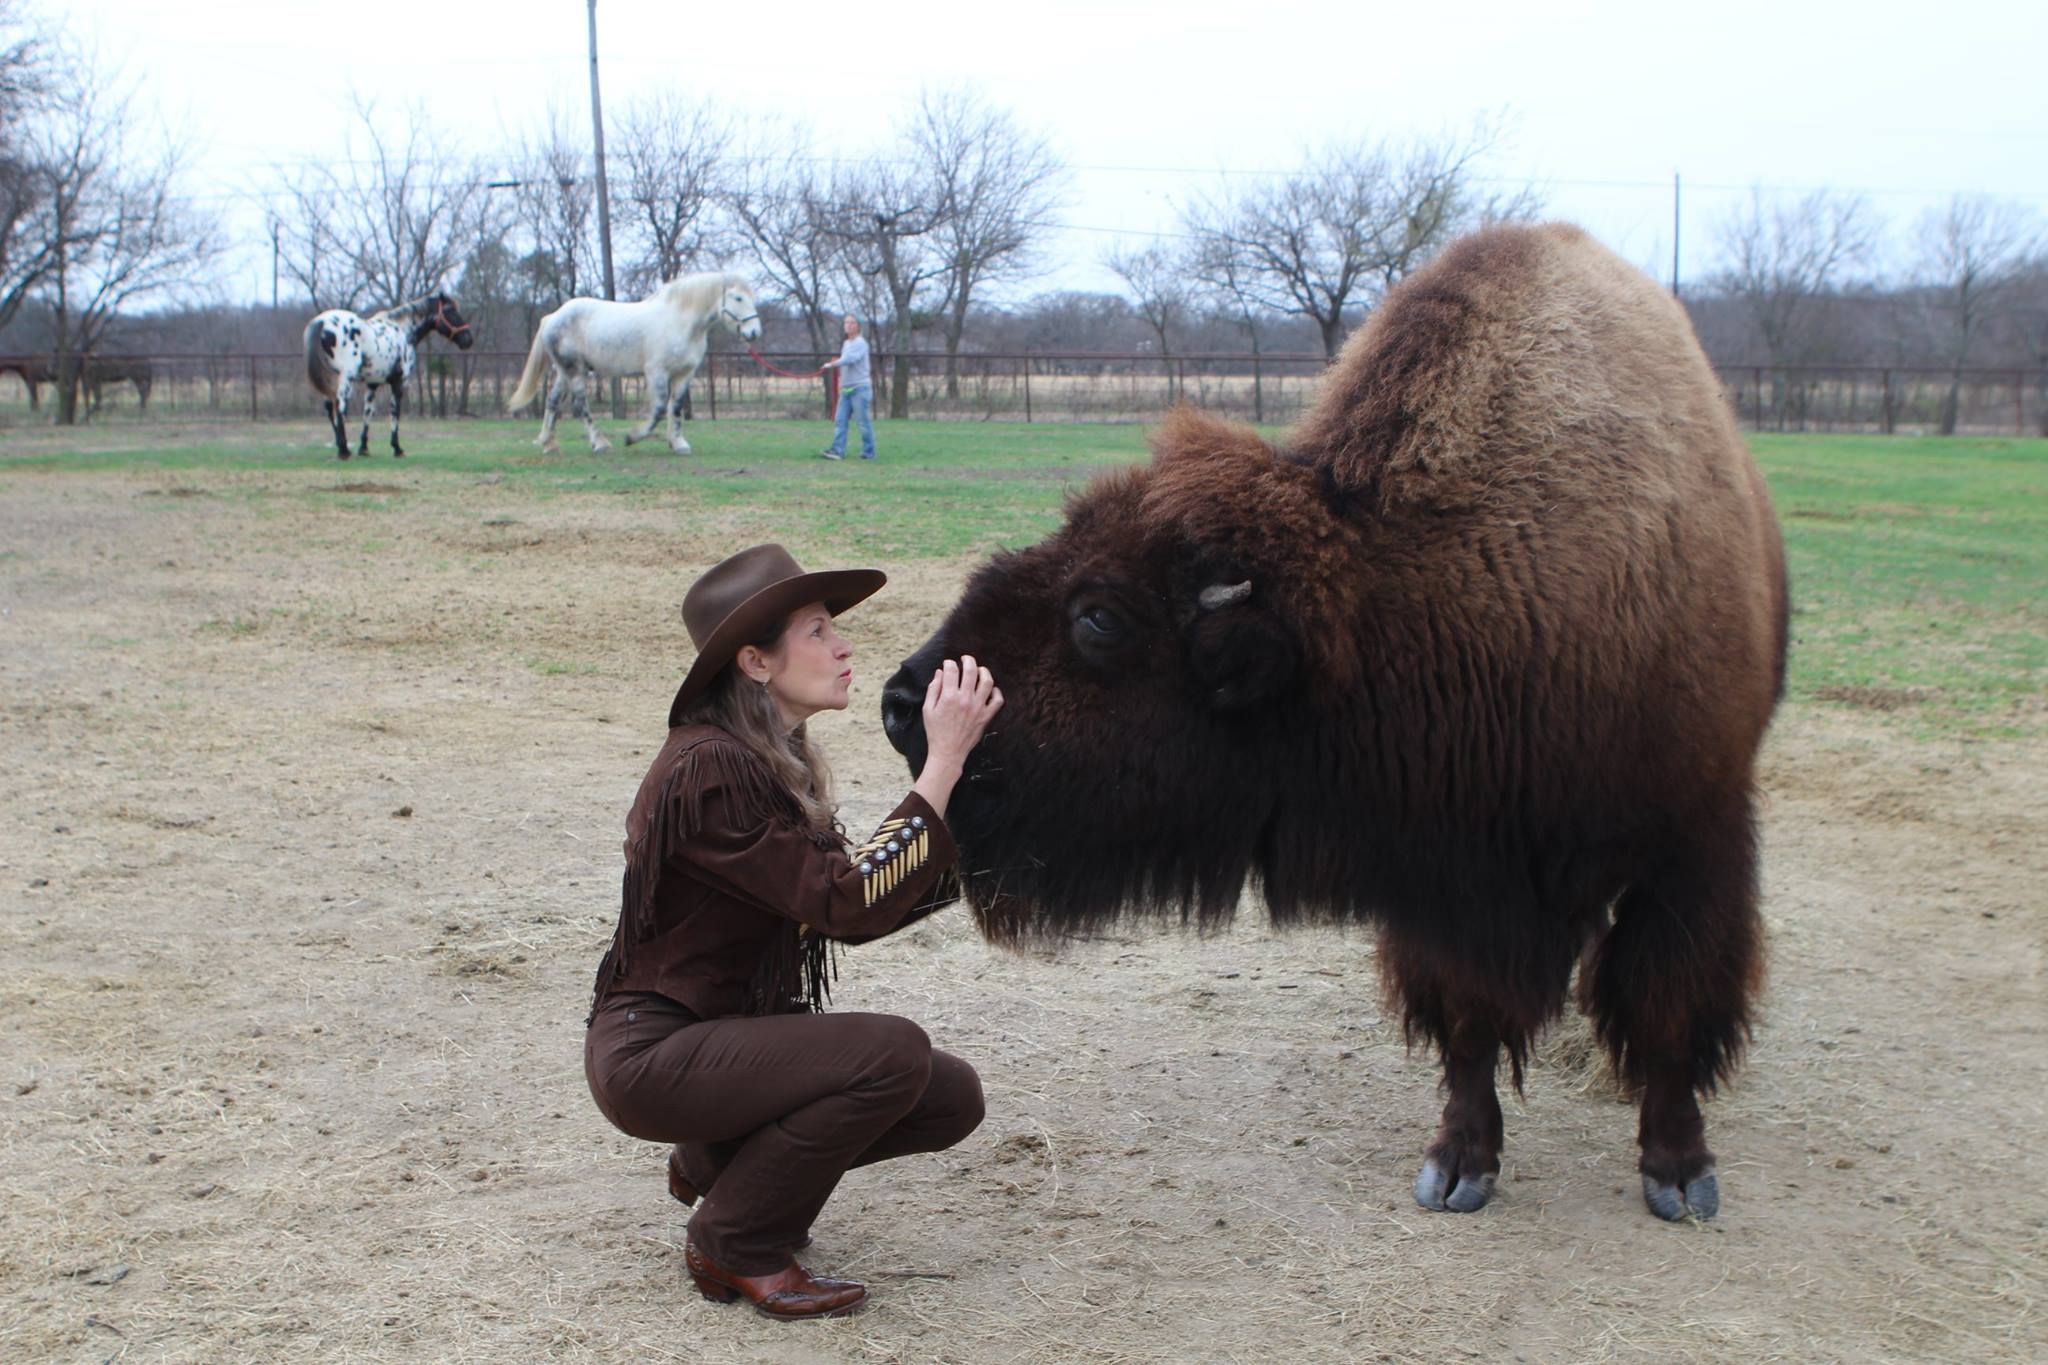 A lady and a bison in a field